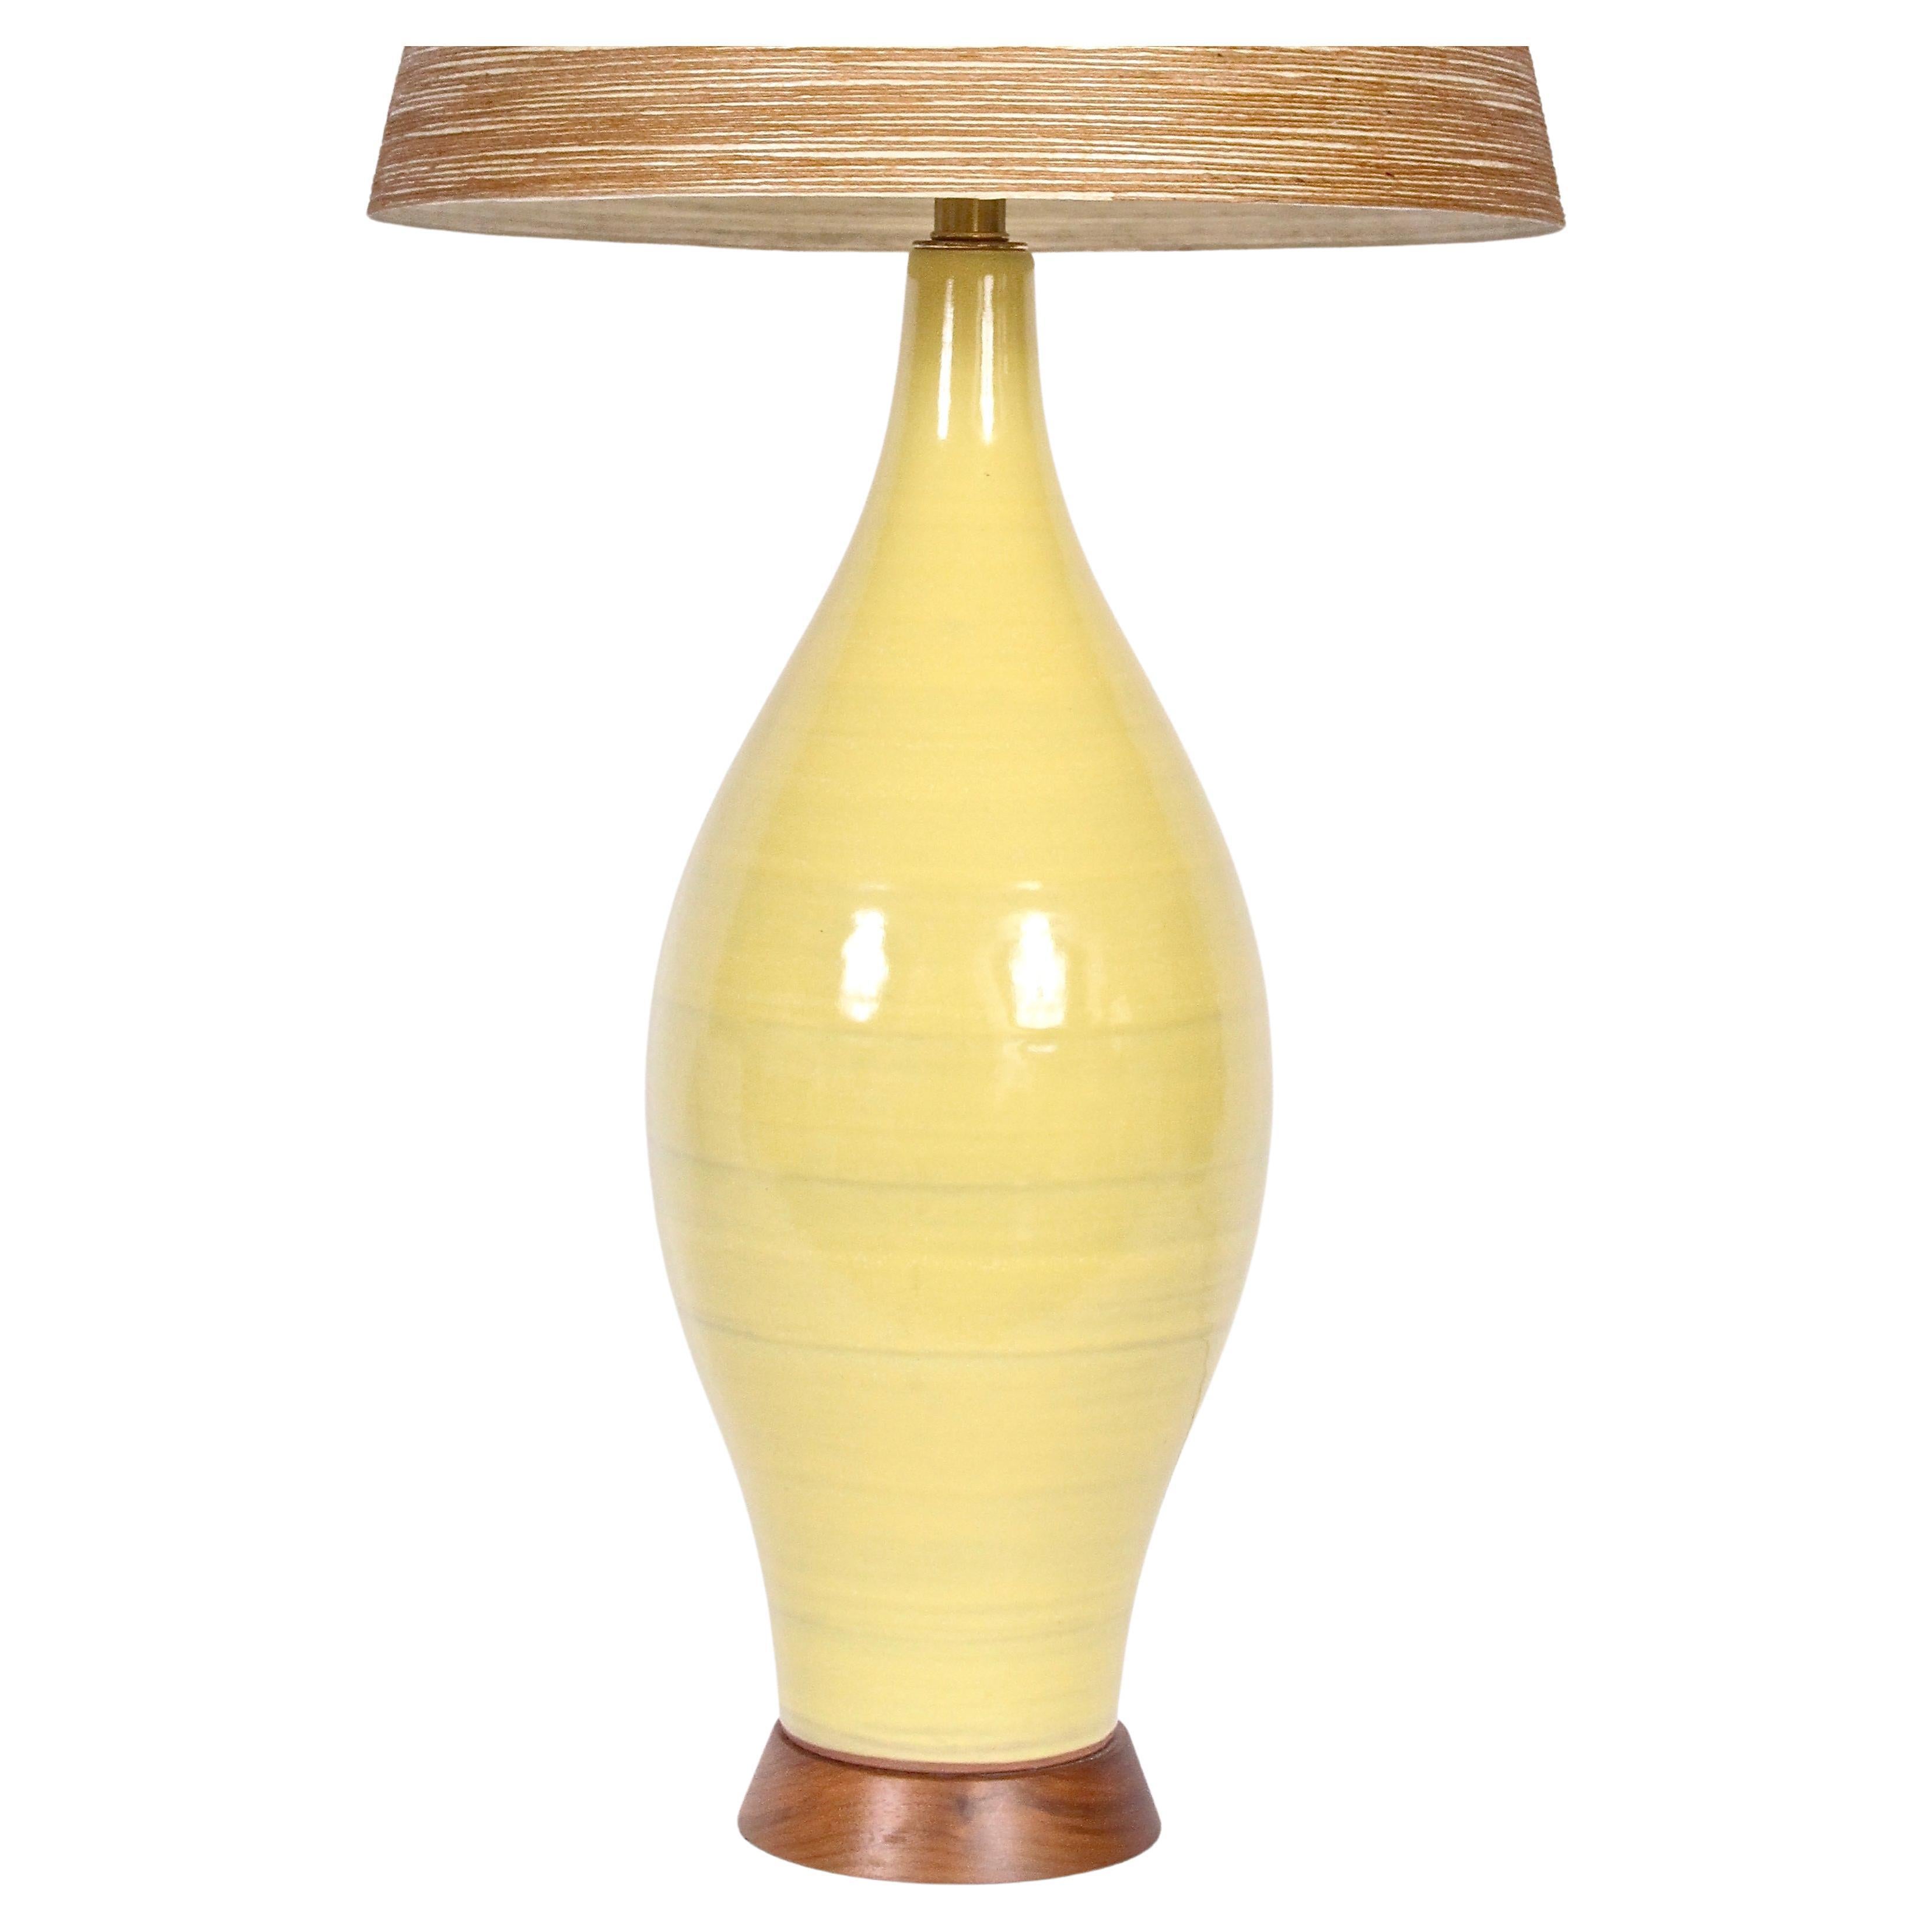 Monumental Design-Technics Bright Yellow Banded Art Pottery Table Lamp